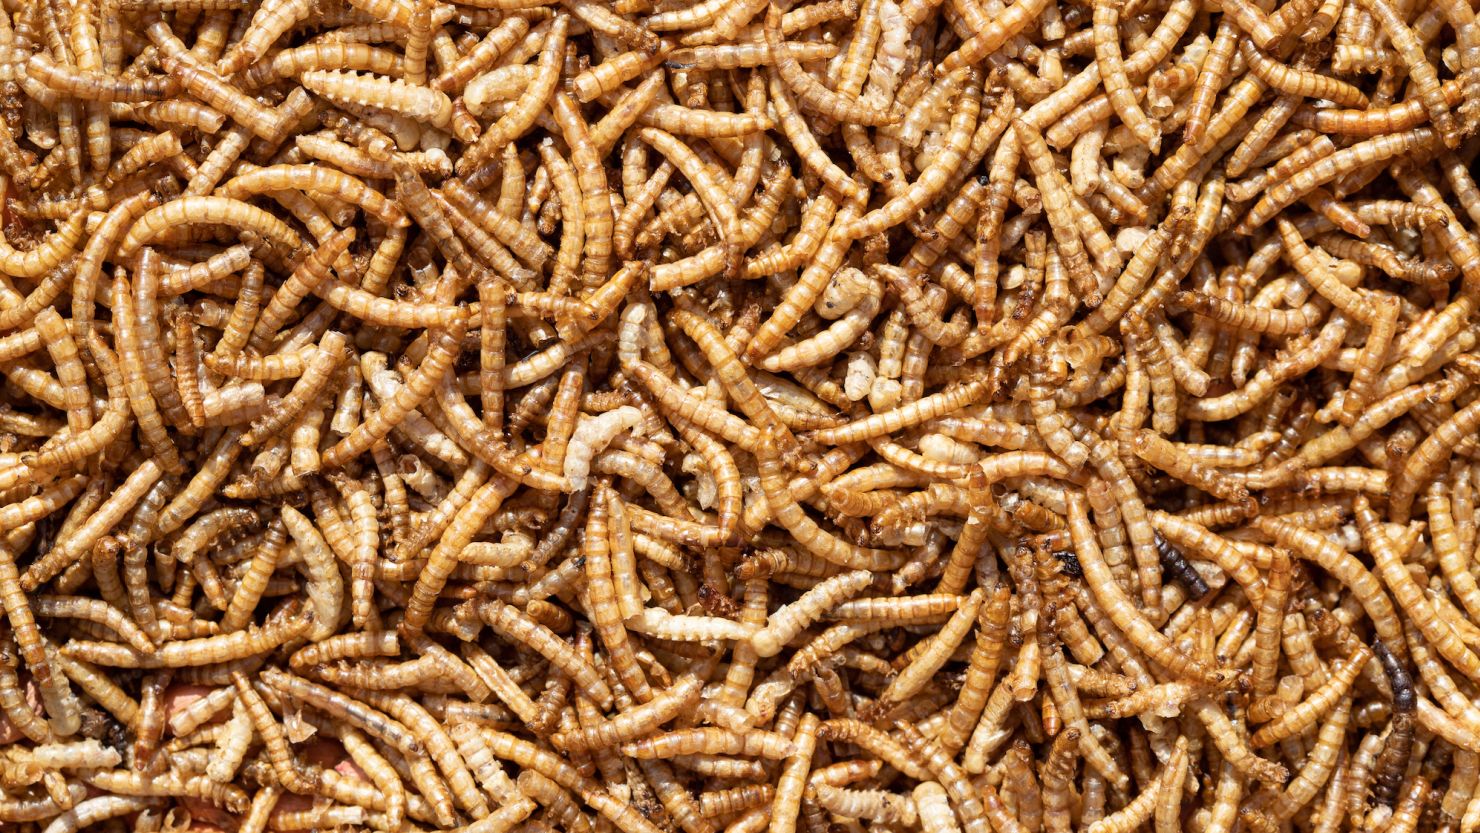 Mealworms cooked in sugar may be the perfect ingredient for carnivores and others looking for meaty, protein-rich, and sustainable seasoning, according to research by a team of Korean scientists.